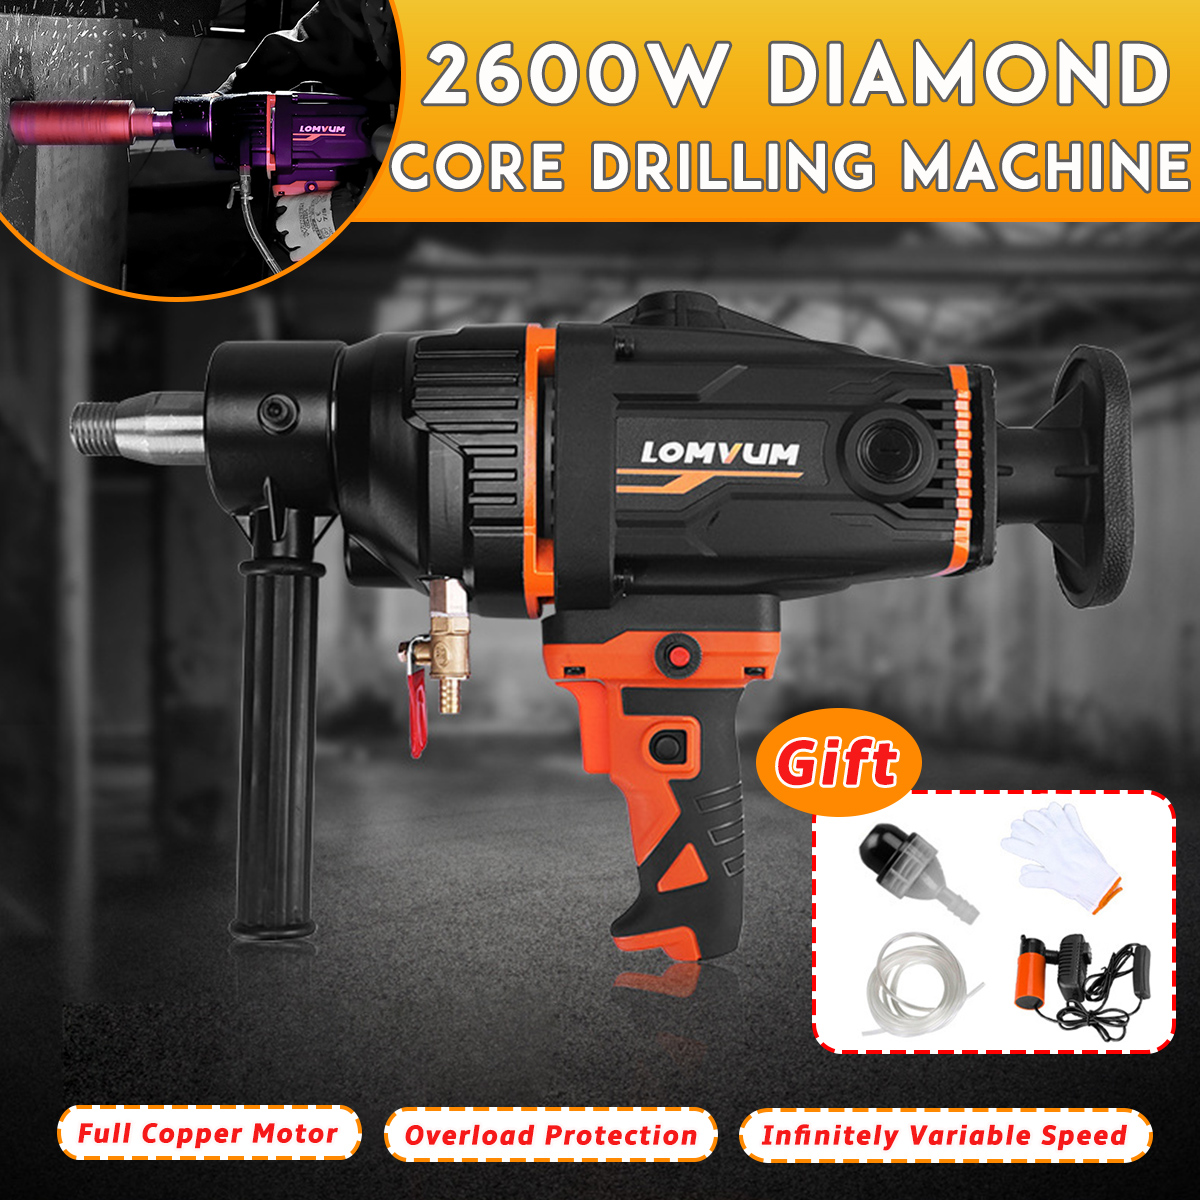 2600W-220V-1800-rpm-Diamond-Core-Hole-Puncher--Drilling-Machine-Infinitely-Variable-Speed-4-Styles-1598415-2